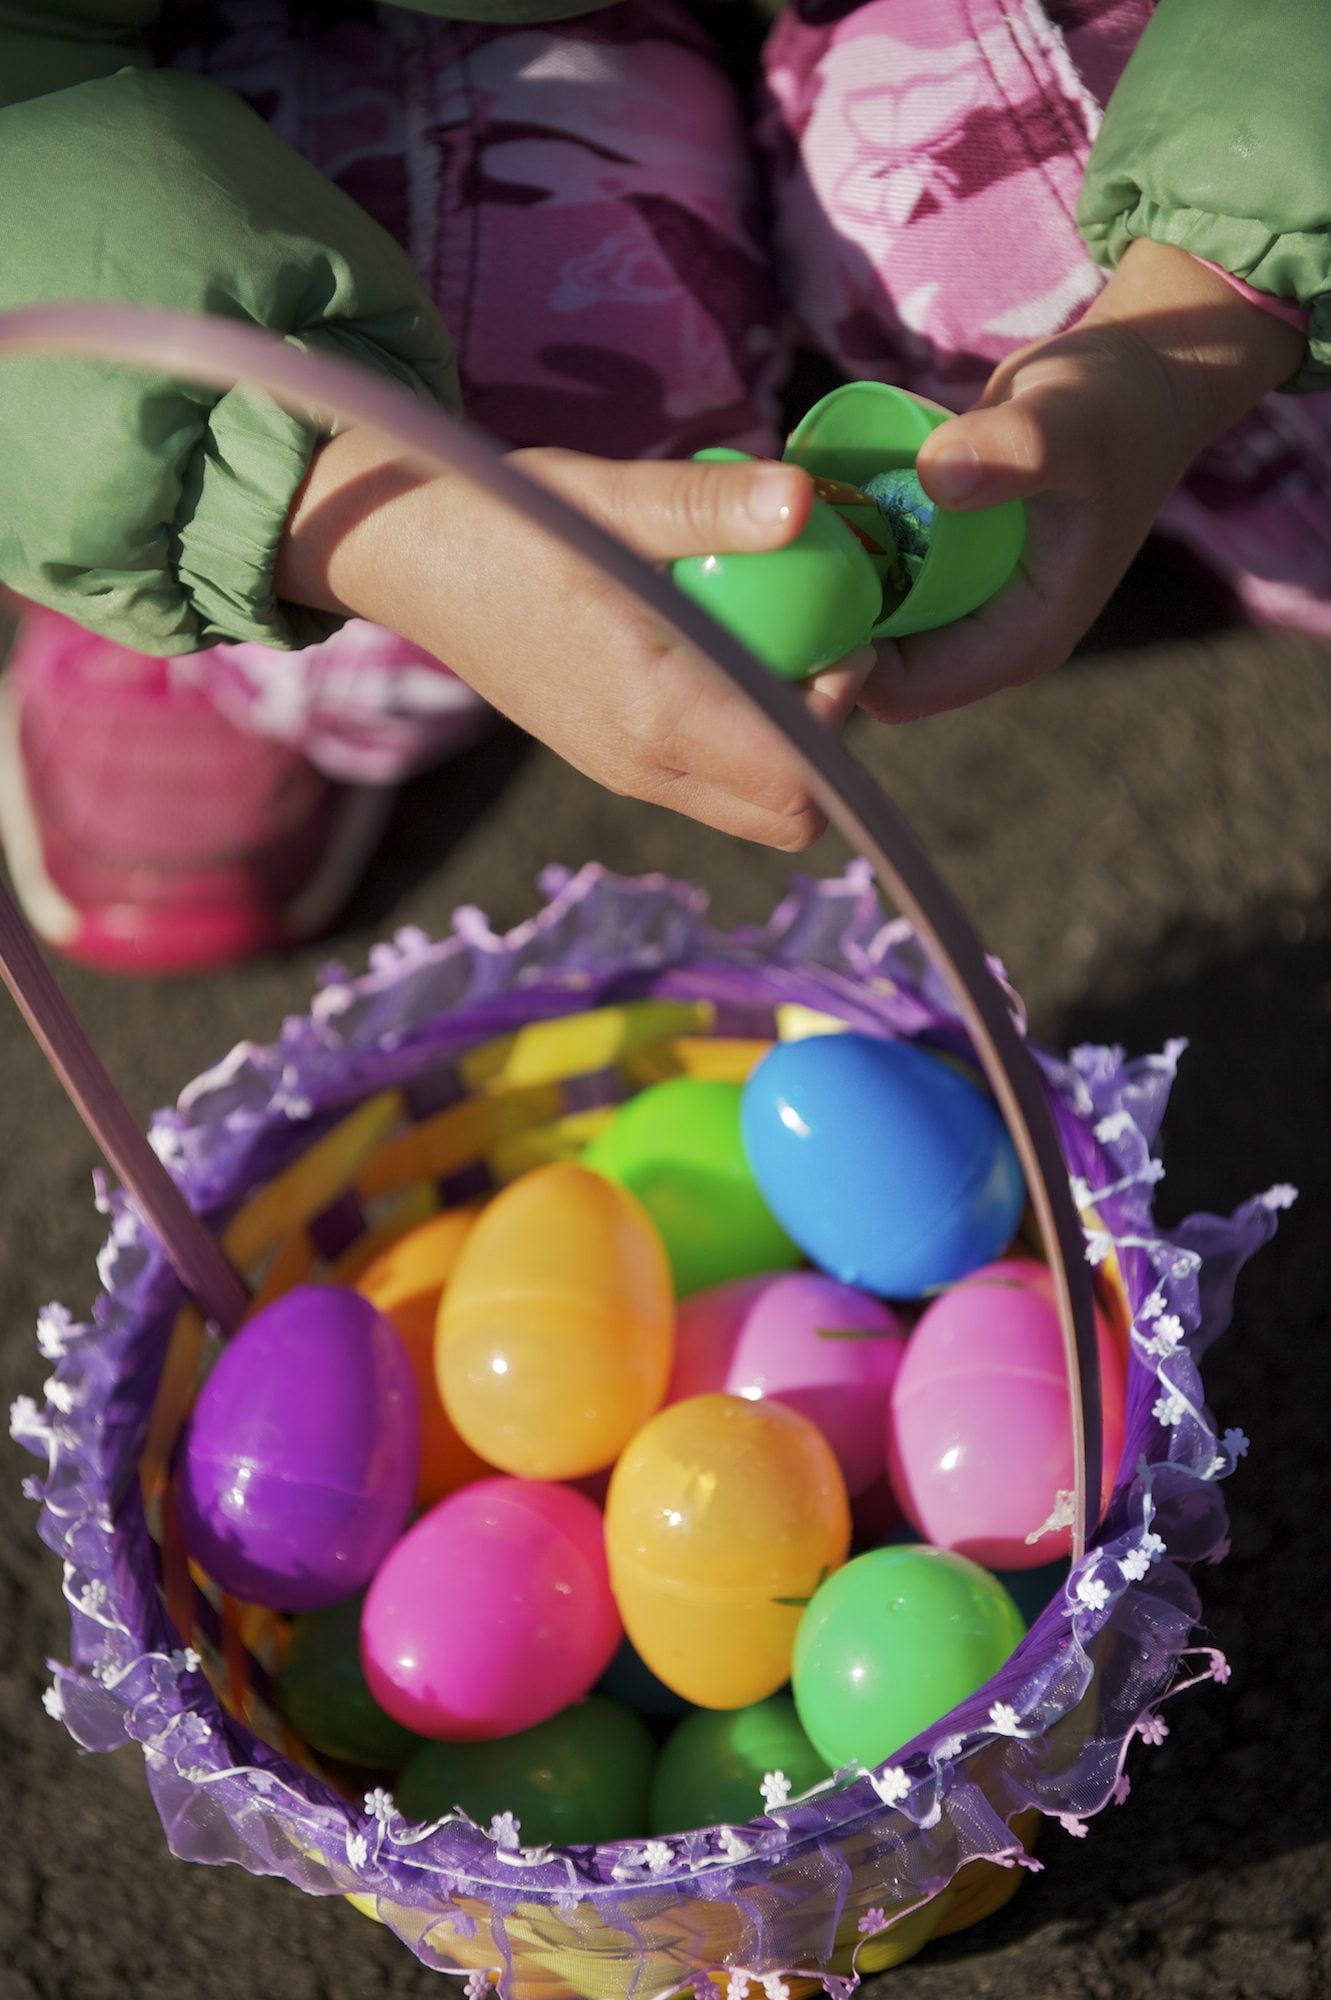 There are many Easter egg hunts around the county this weekend.